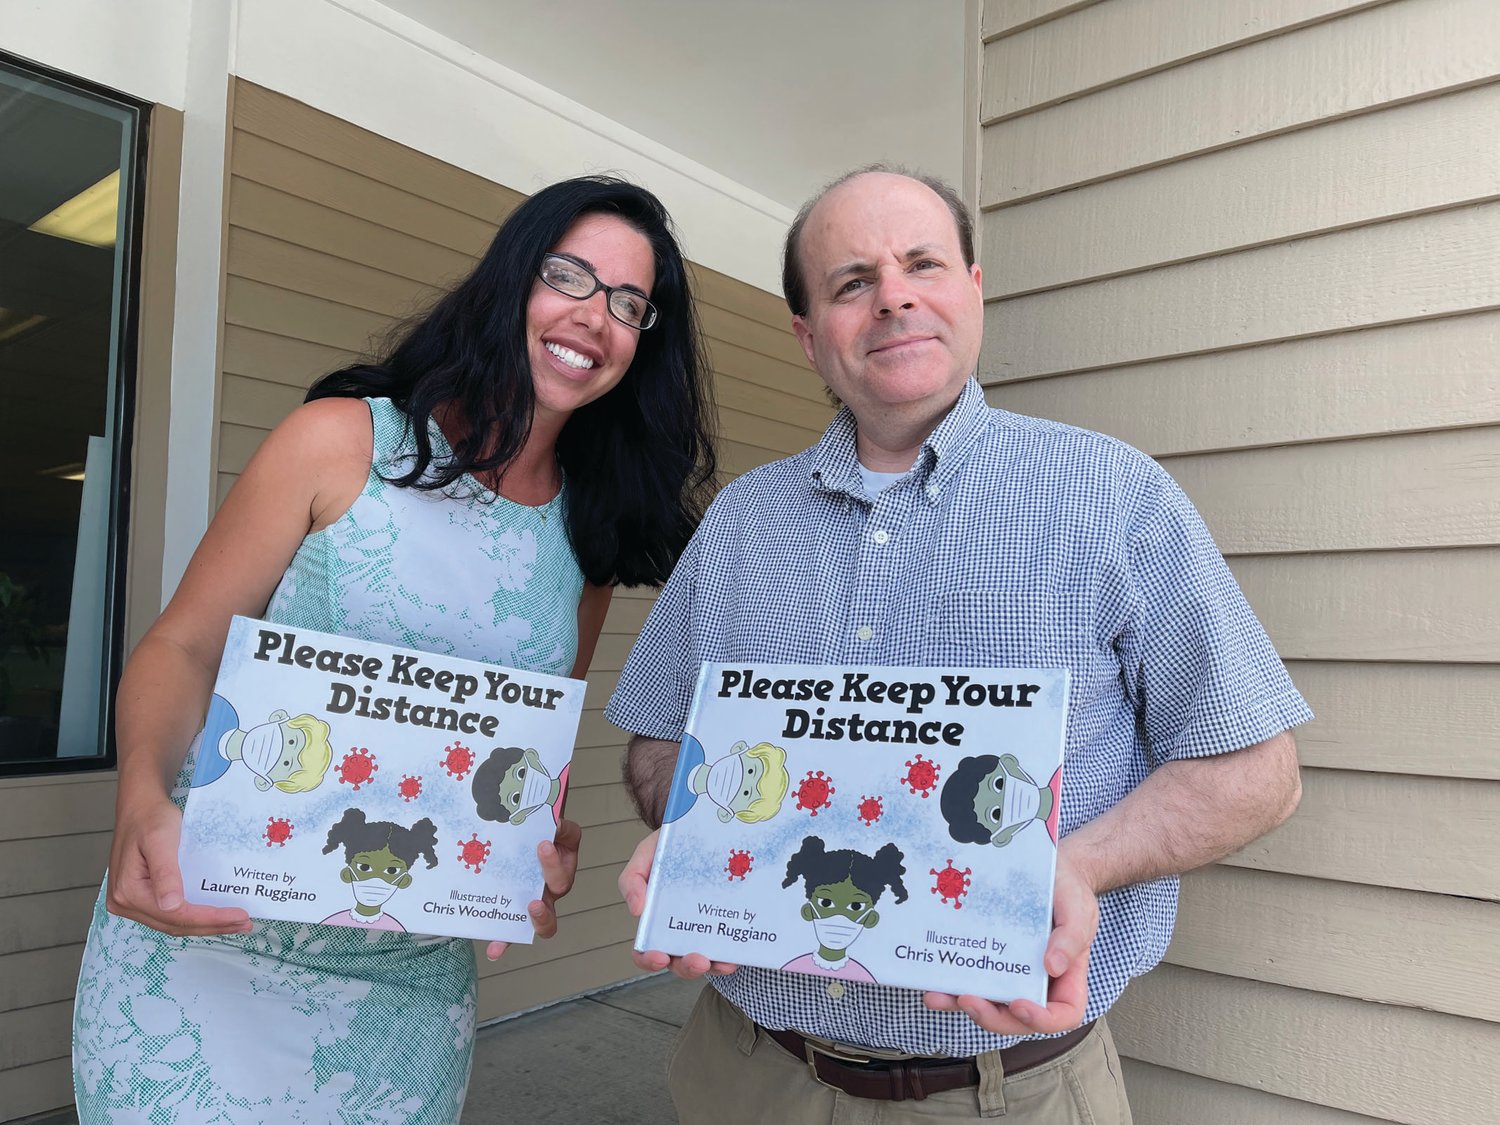 ‘MEANT TO HAPPEN’: The connection between author Lauren Ruggiano and illustrator Chris Woodhouse began online. Recently, their book, “Please Keep Your Distance,” was released through Barnes & Noble.